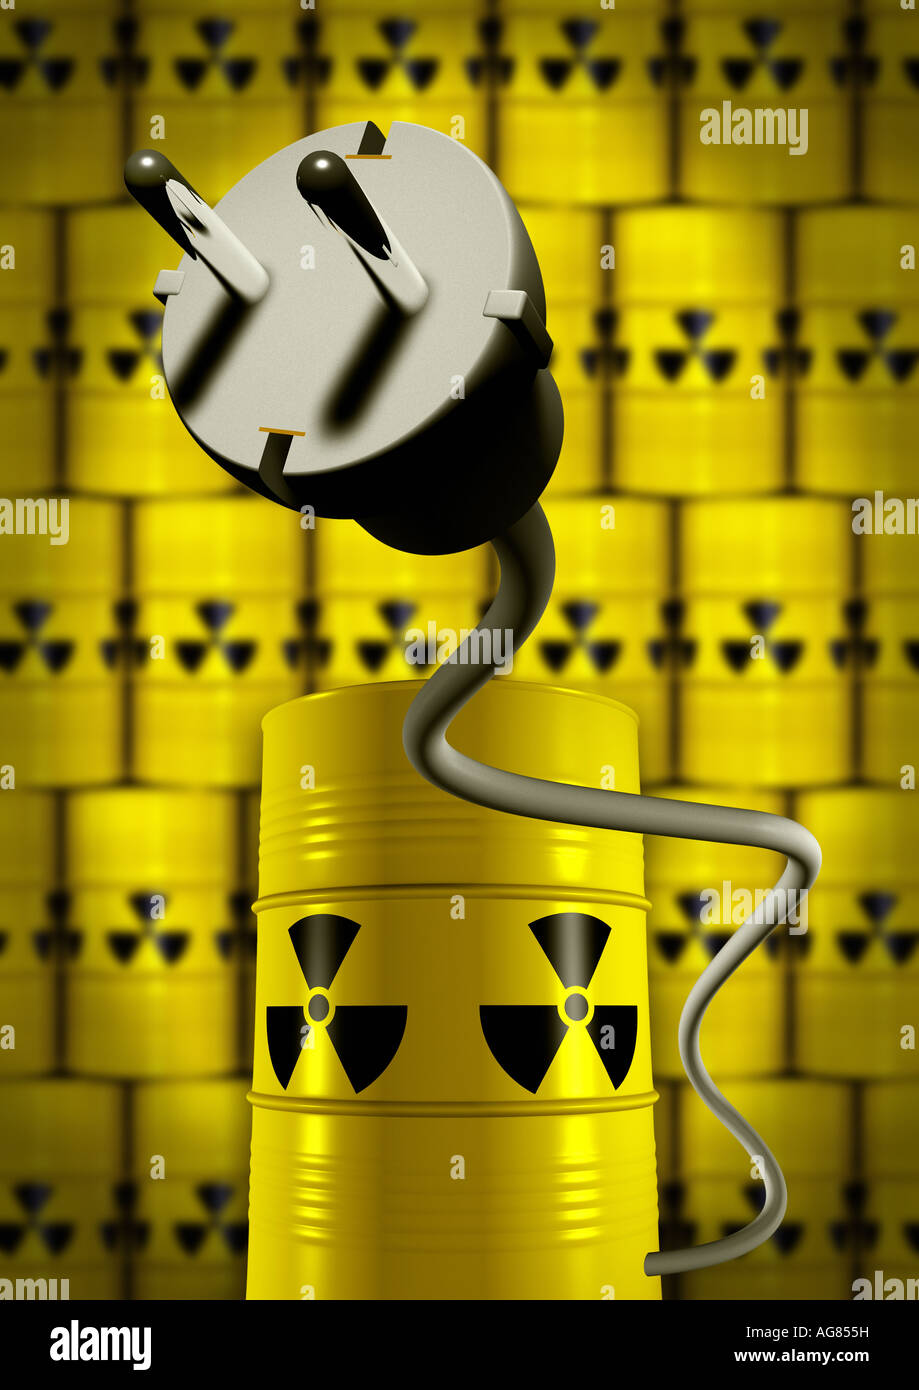 nuclear energy Kernenergie Atomkraft Stock Photo